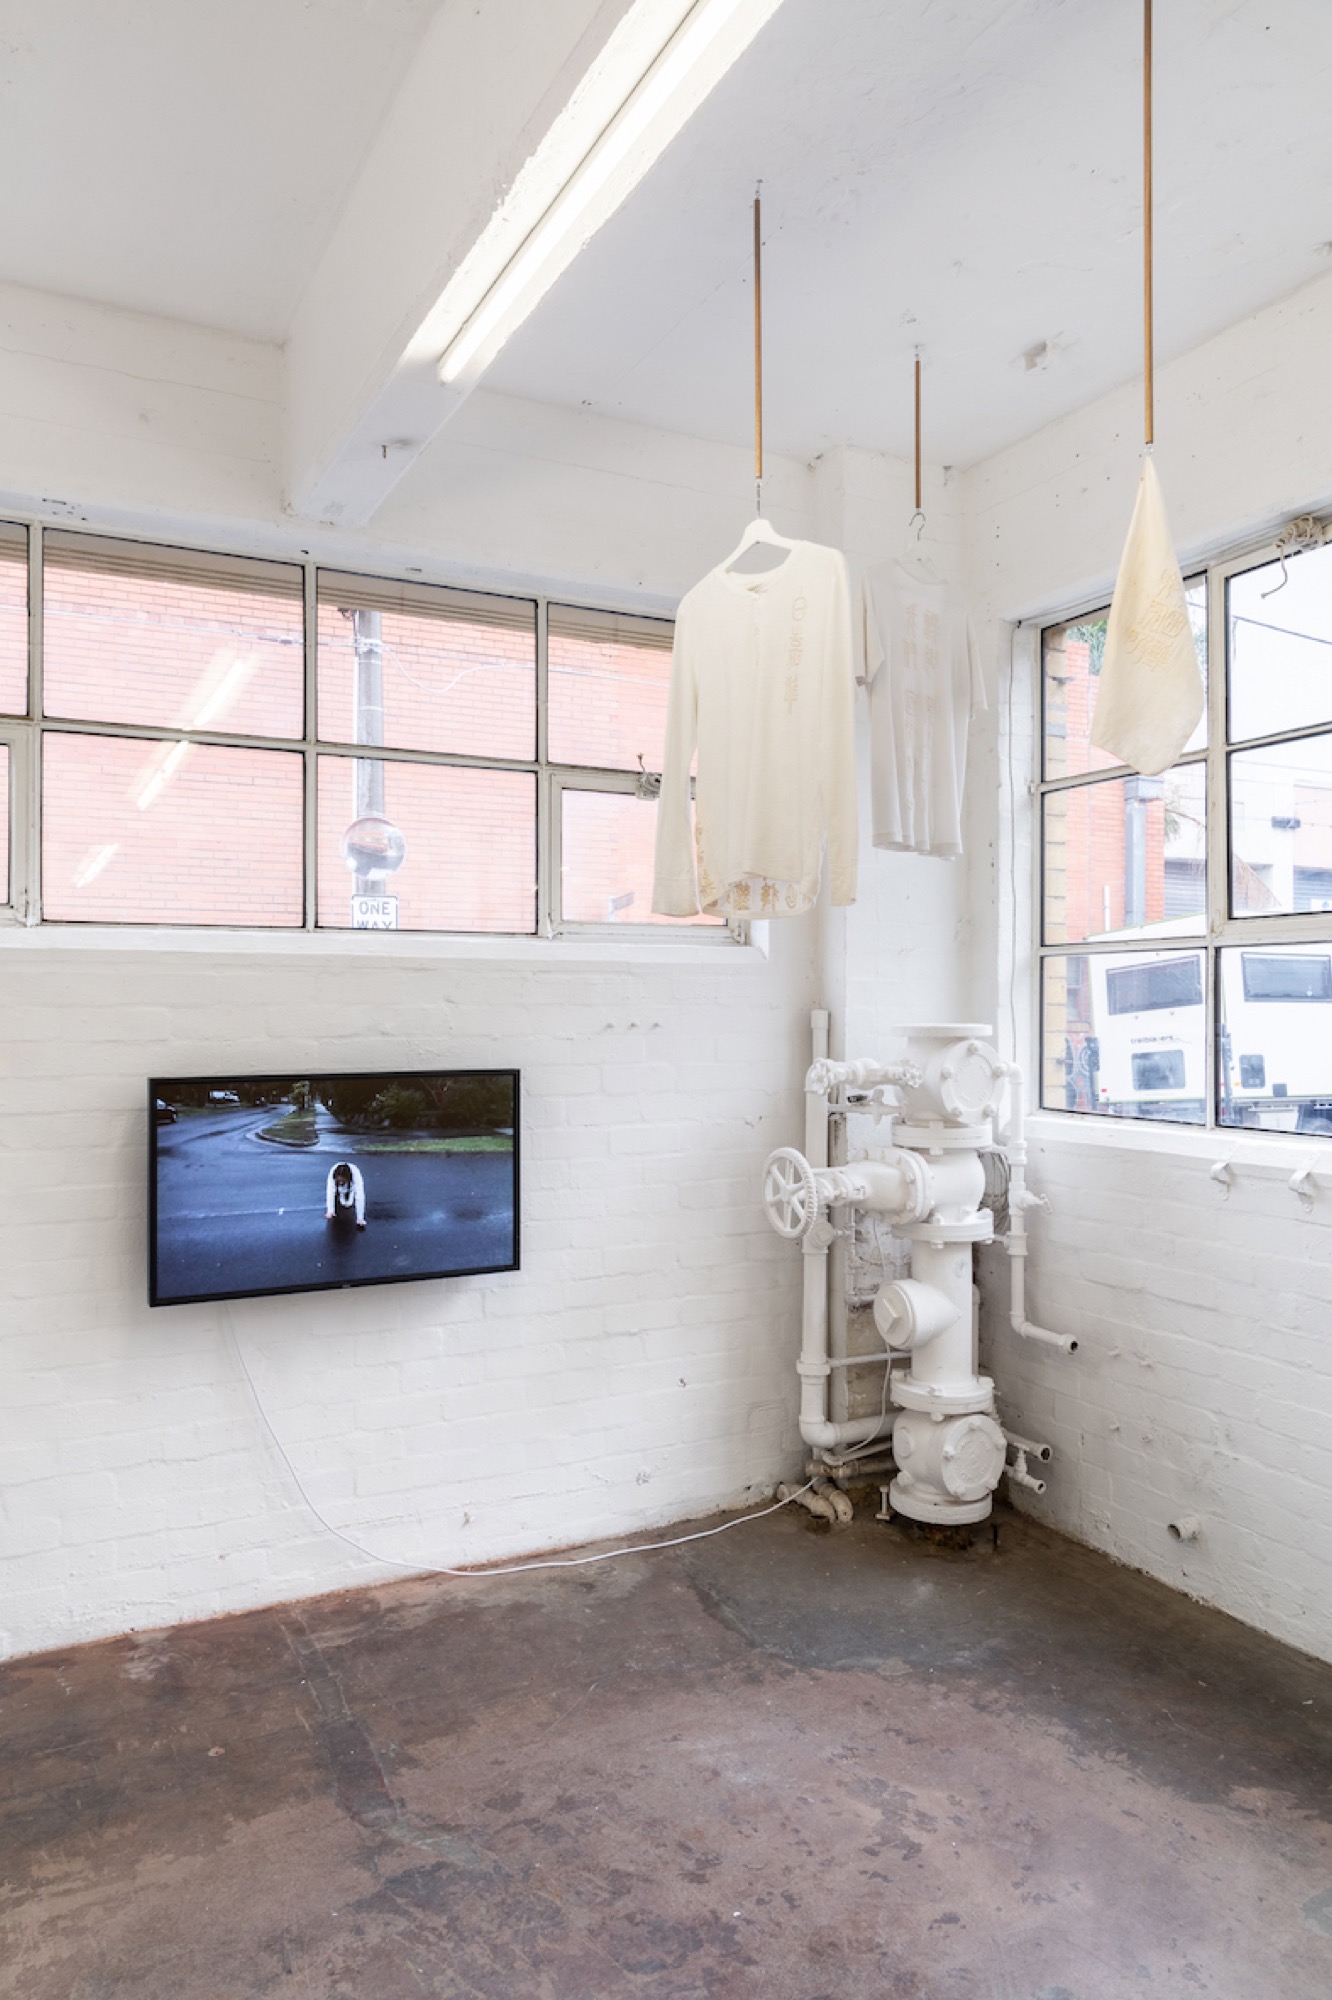 <em>I will never run out of lies or love</em> installation view, image courtesy of gallery, photo: Christo Crocker. Above: Anjie Pai, <em>Ah gong&#39;s top, Ah gong&#39;s undershirt</em> and <em>Ah gong&#39;s handkerchief,</em> 2018-2019, raw silk on cotton and linen, dimensions variable. Below: <em>On Steady Ground,</em> 2019, digital video footage (looped) 13:00 mins.